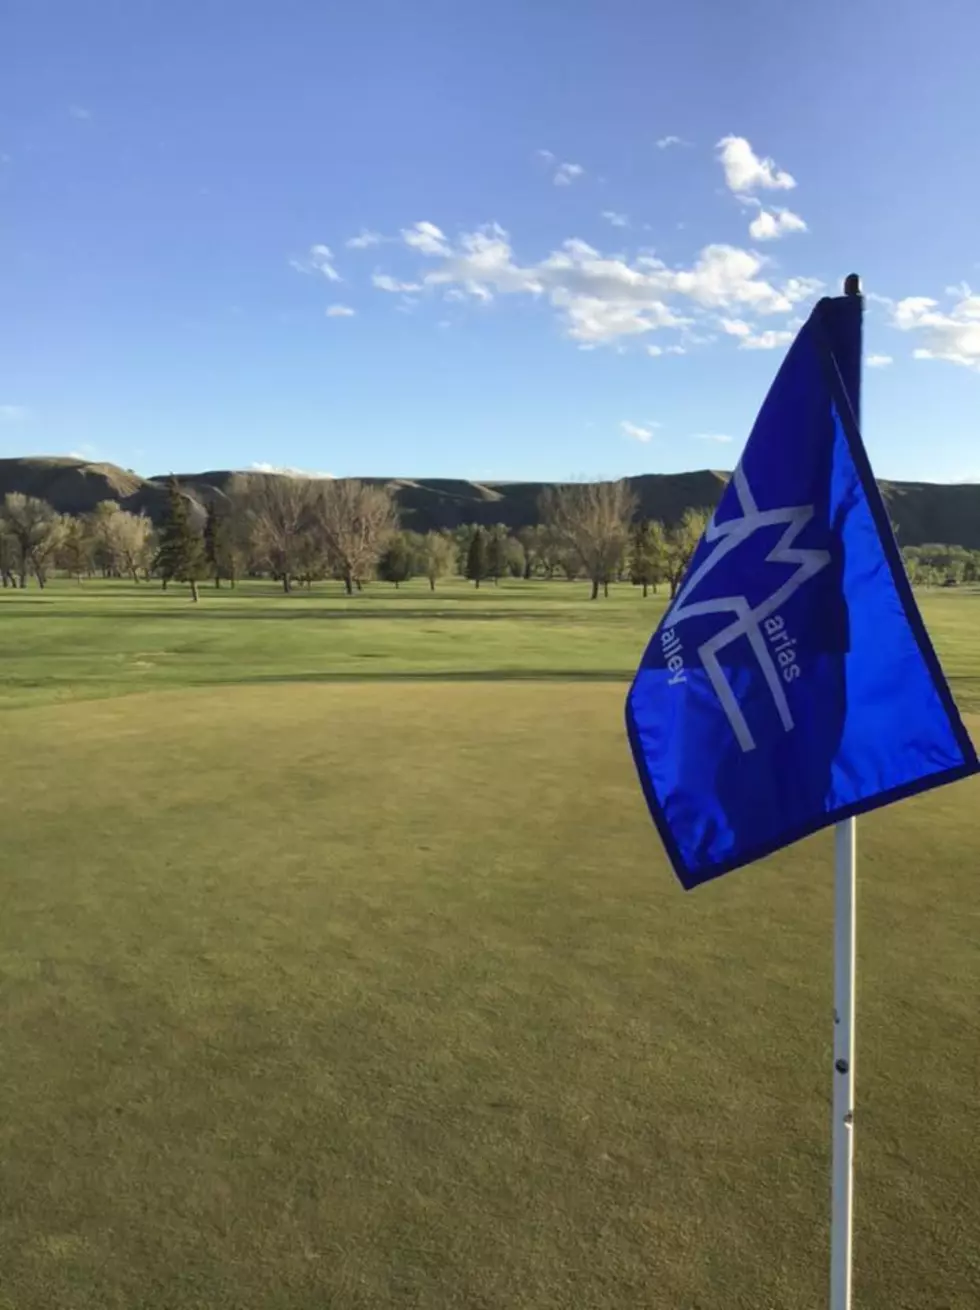 Farm and Ranch Golf Results